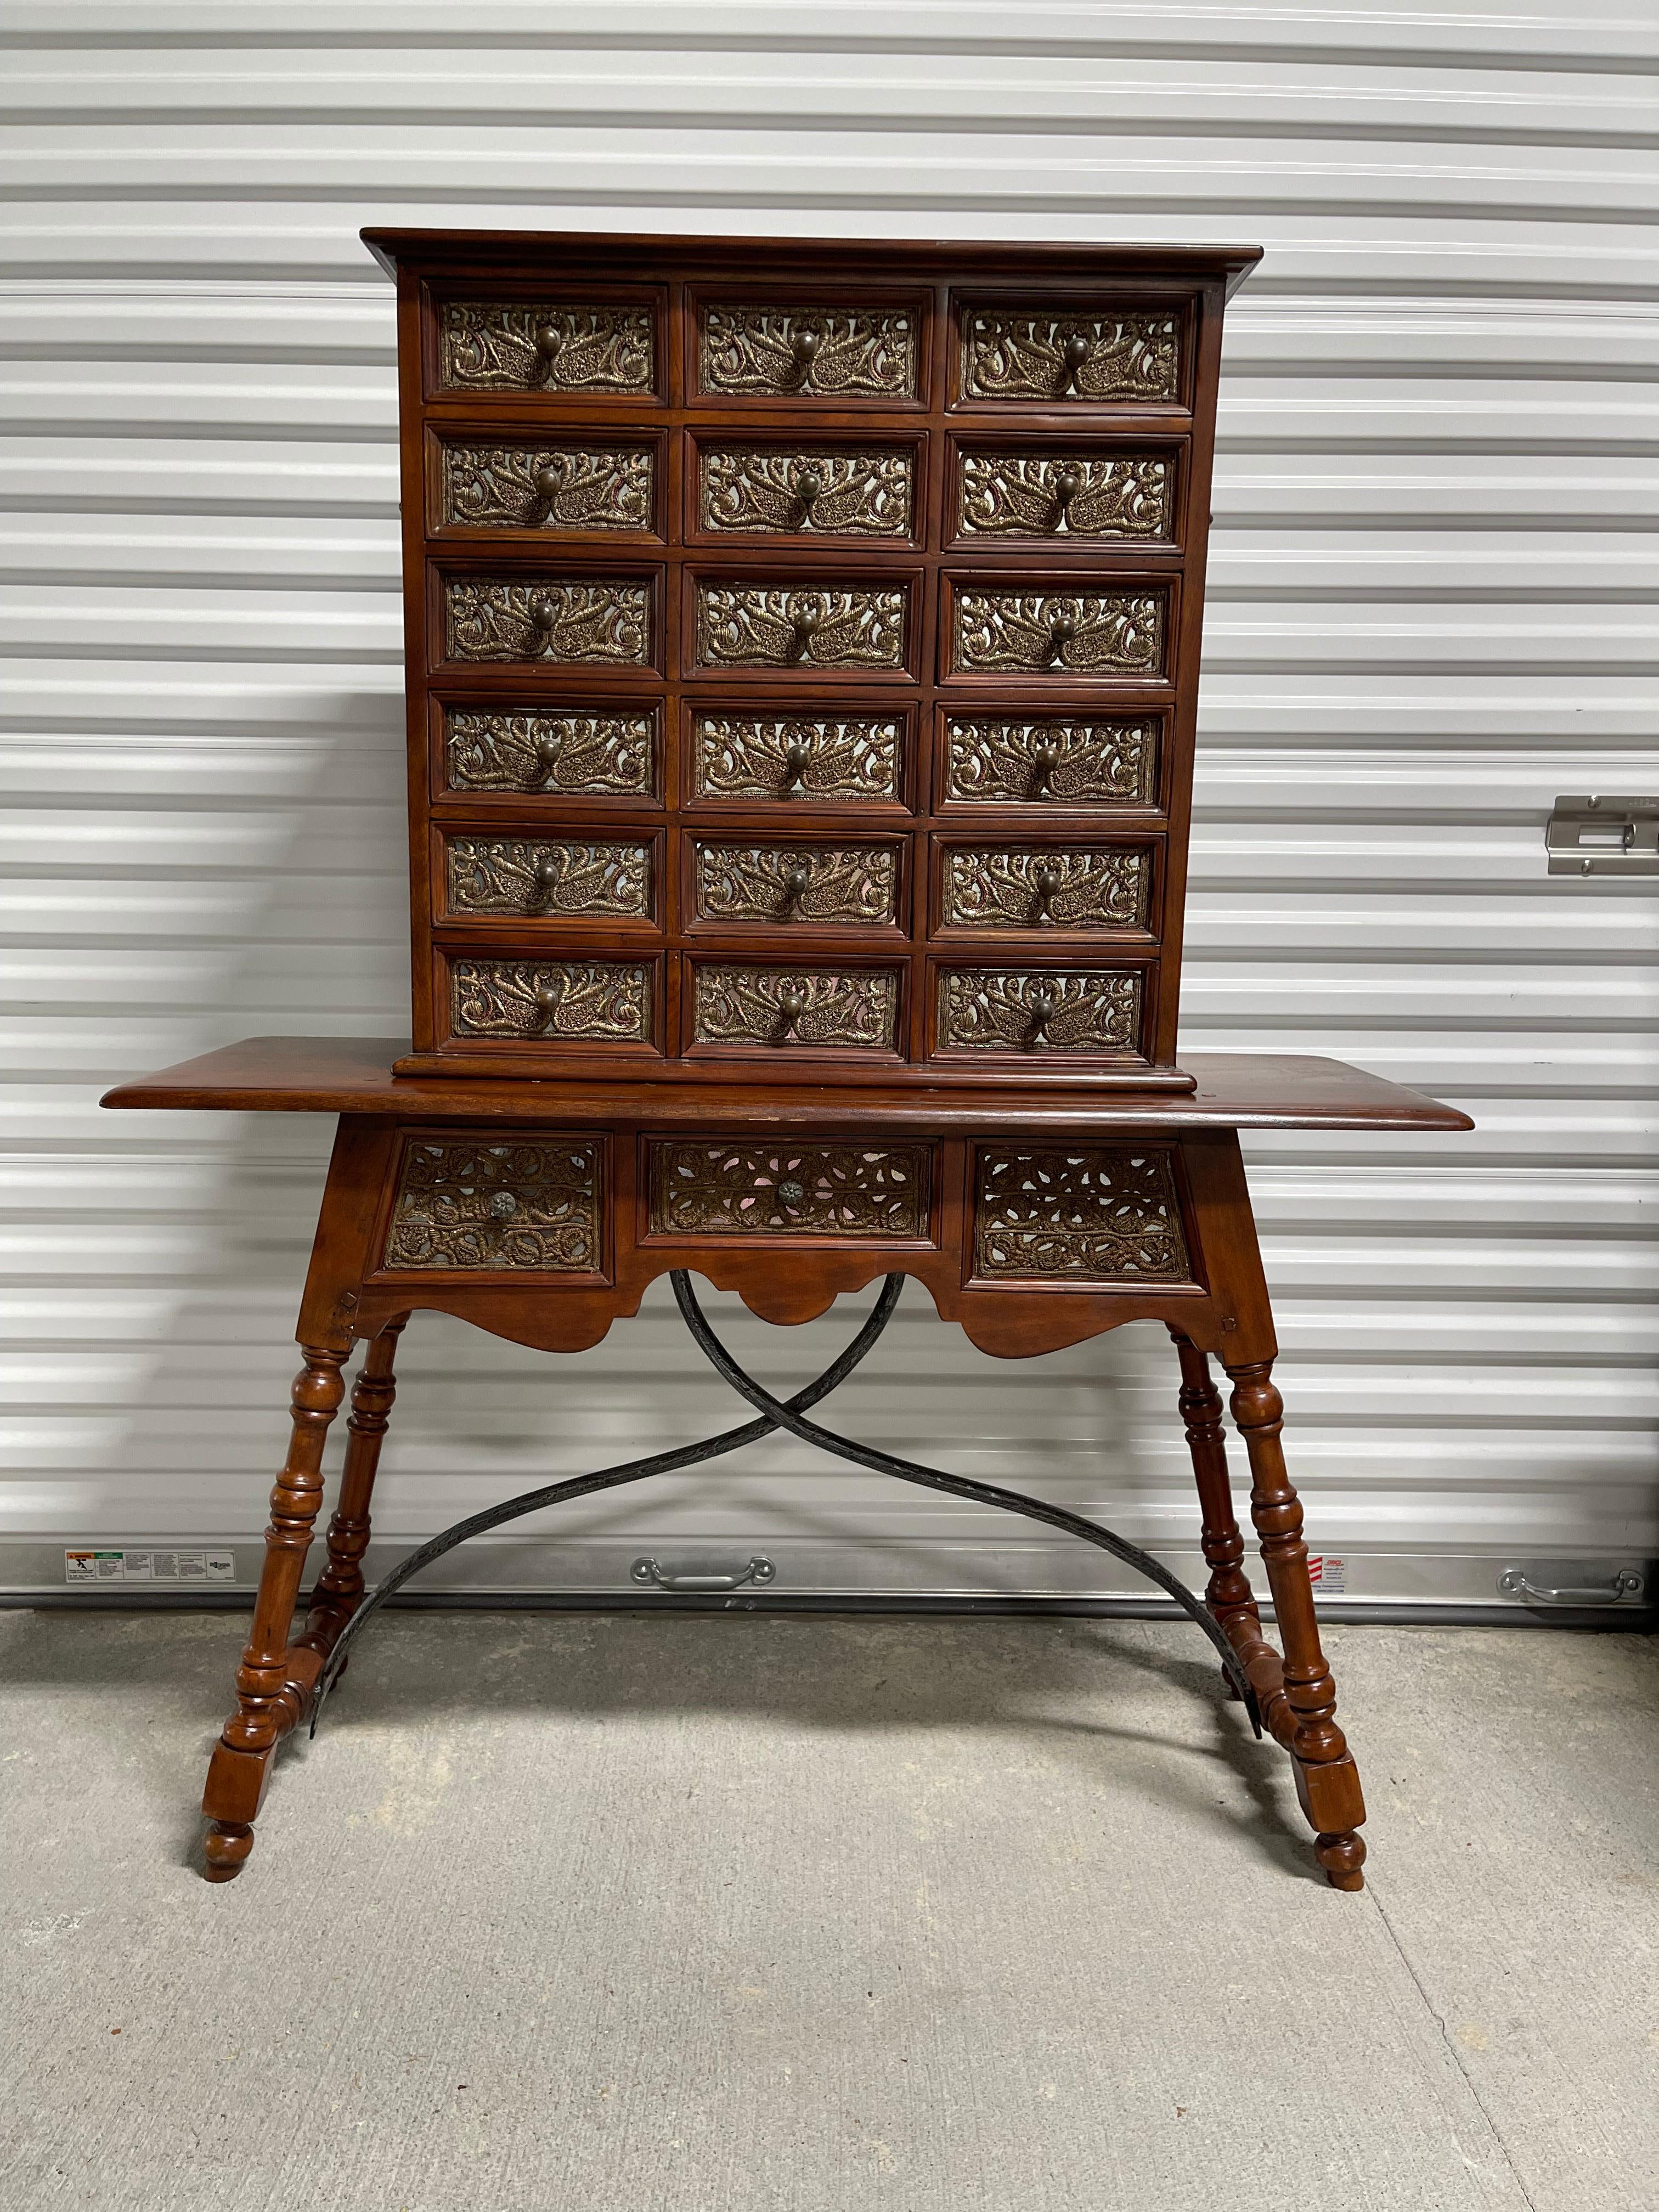 Chinese Apothecary cabinet with drawers on a table, early 20th century. 
Measures: Table - 15.5